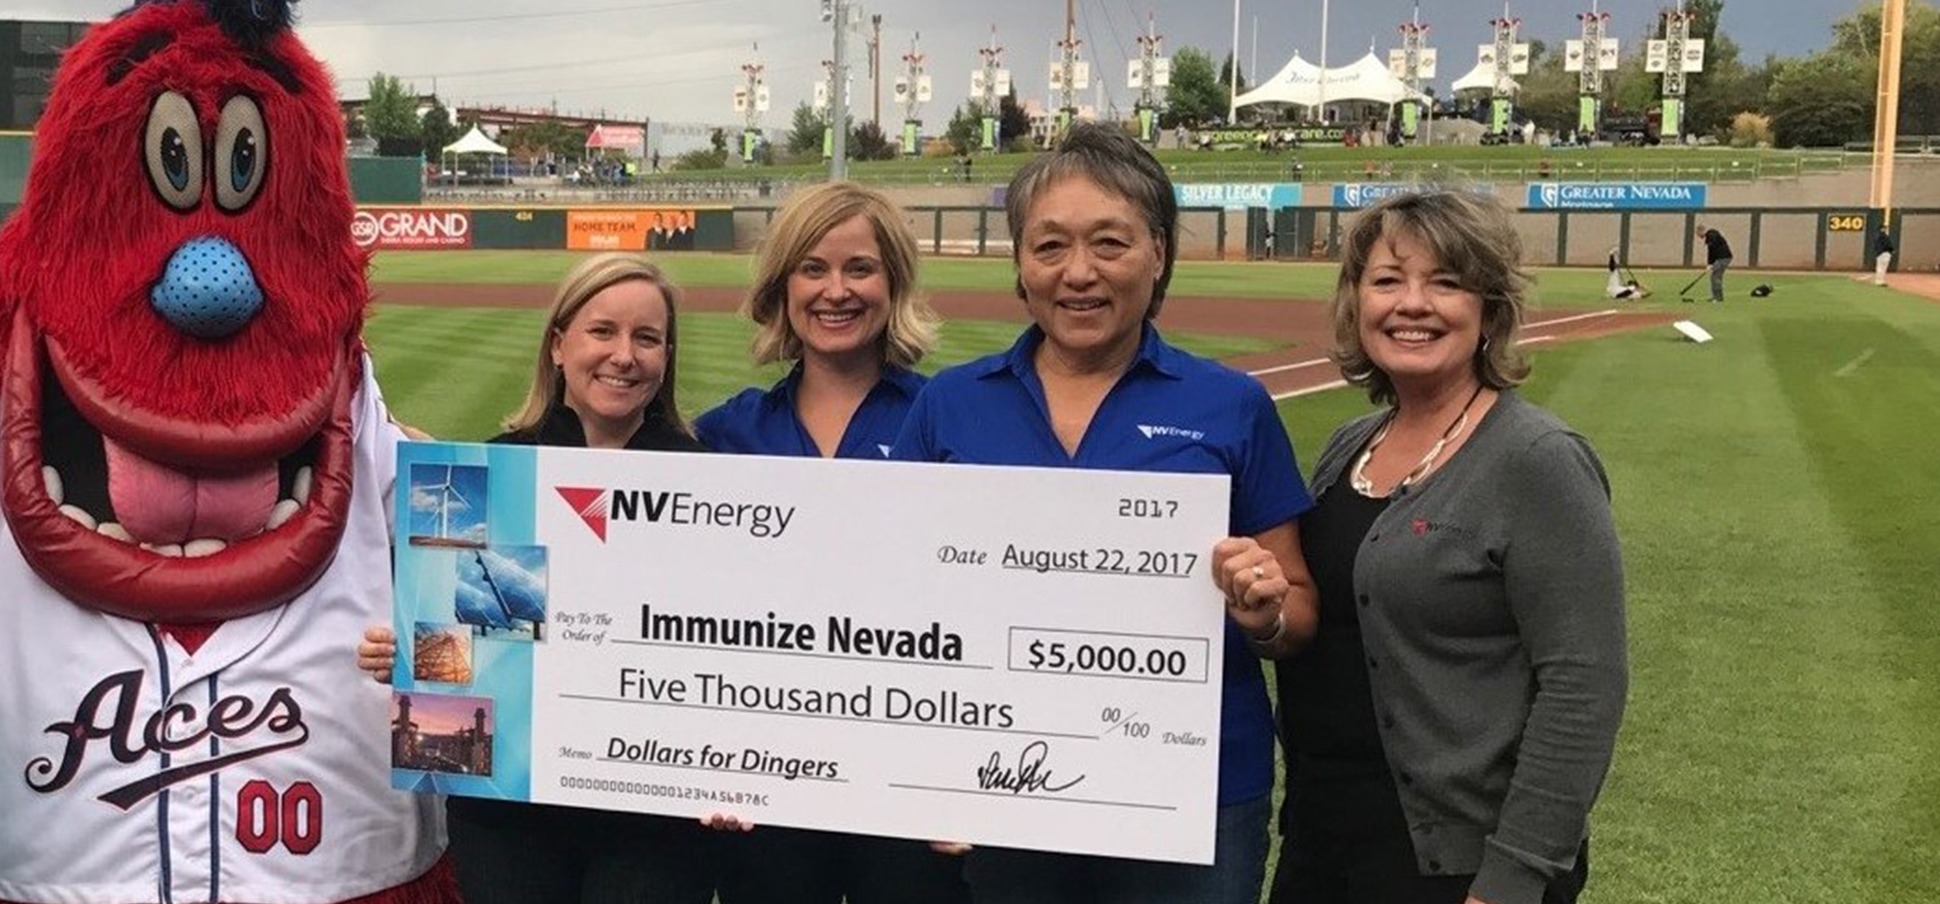 NVEnergy presents $5,000 check to Immunize Nevada at Aces baseball game 